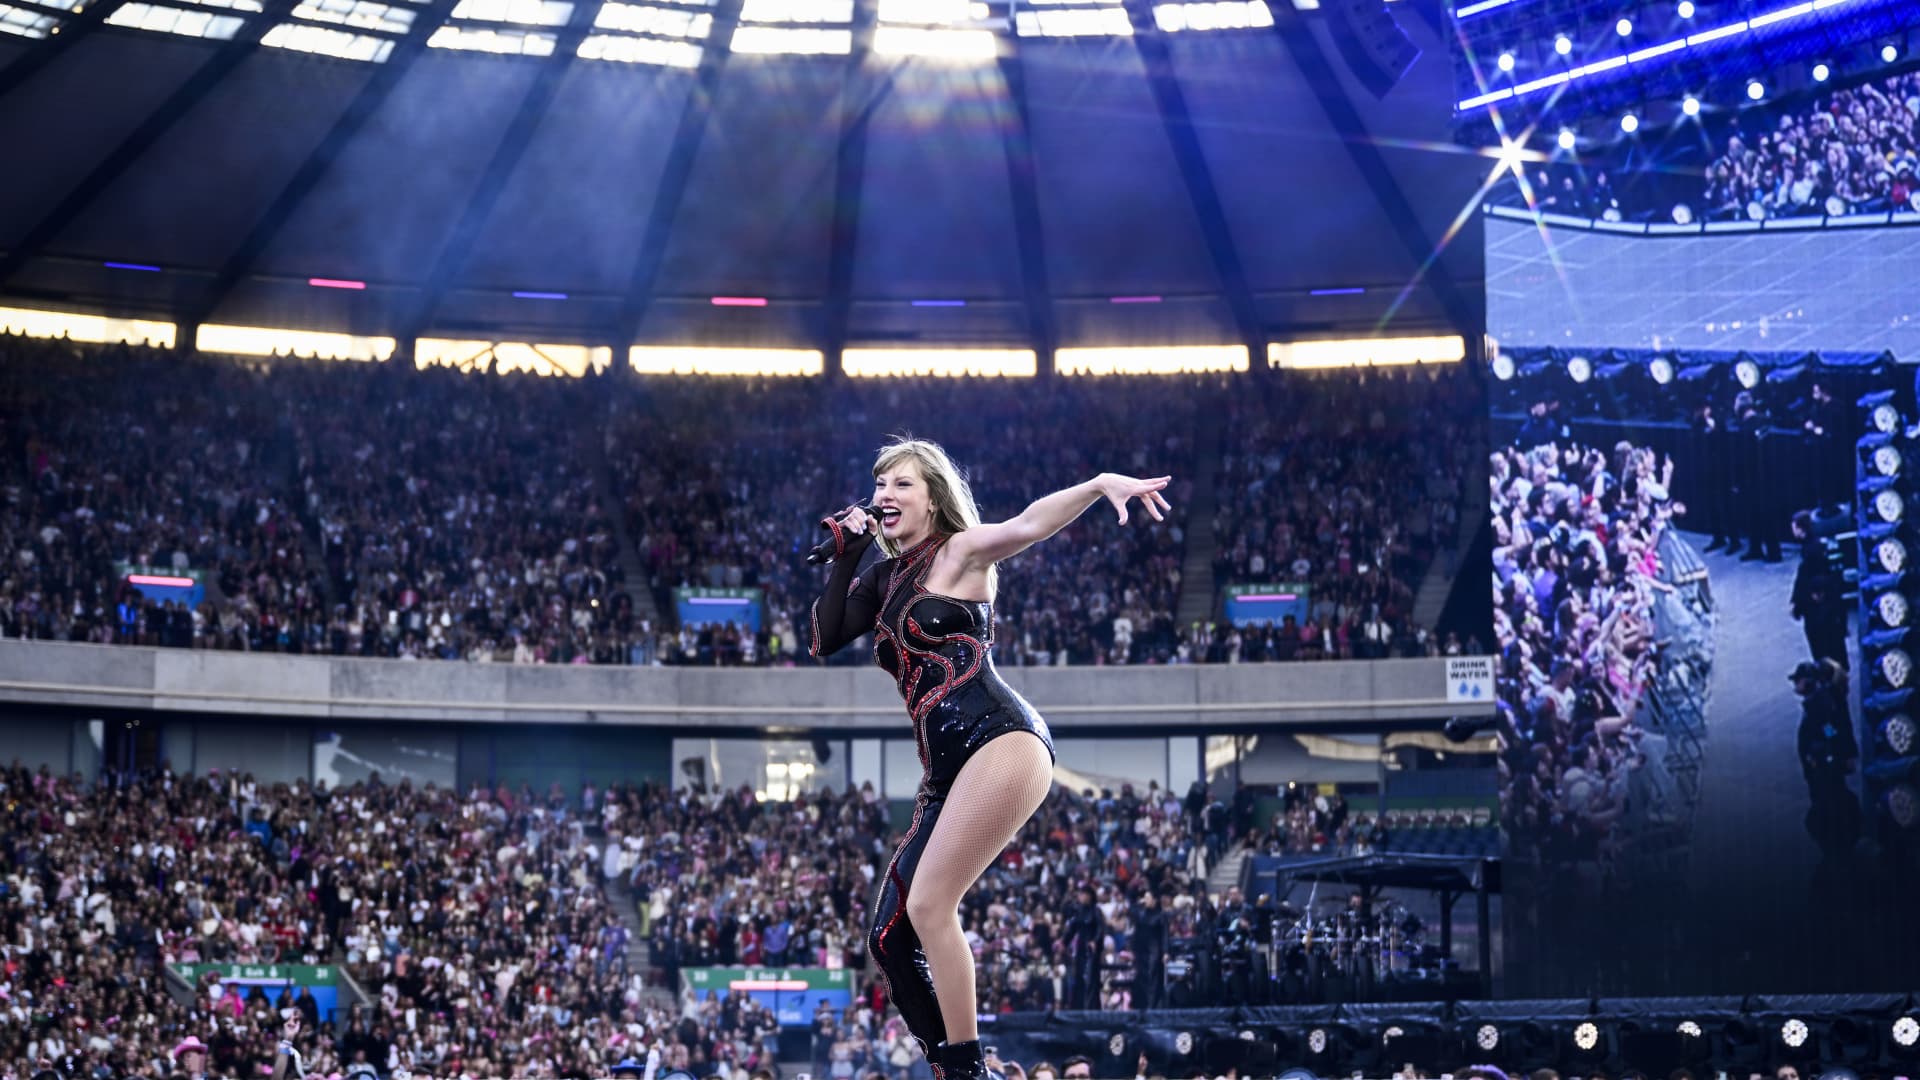 Taylor Swift Eras Tour shows measurements of earthquakes in Scotland